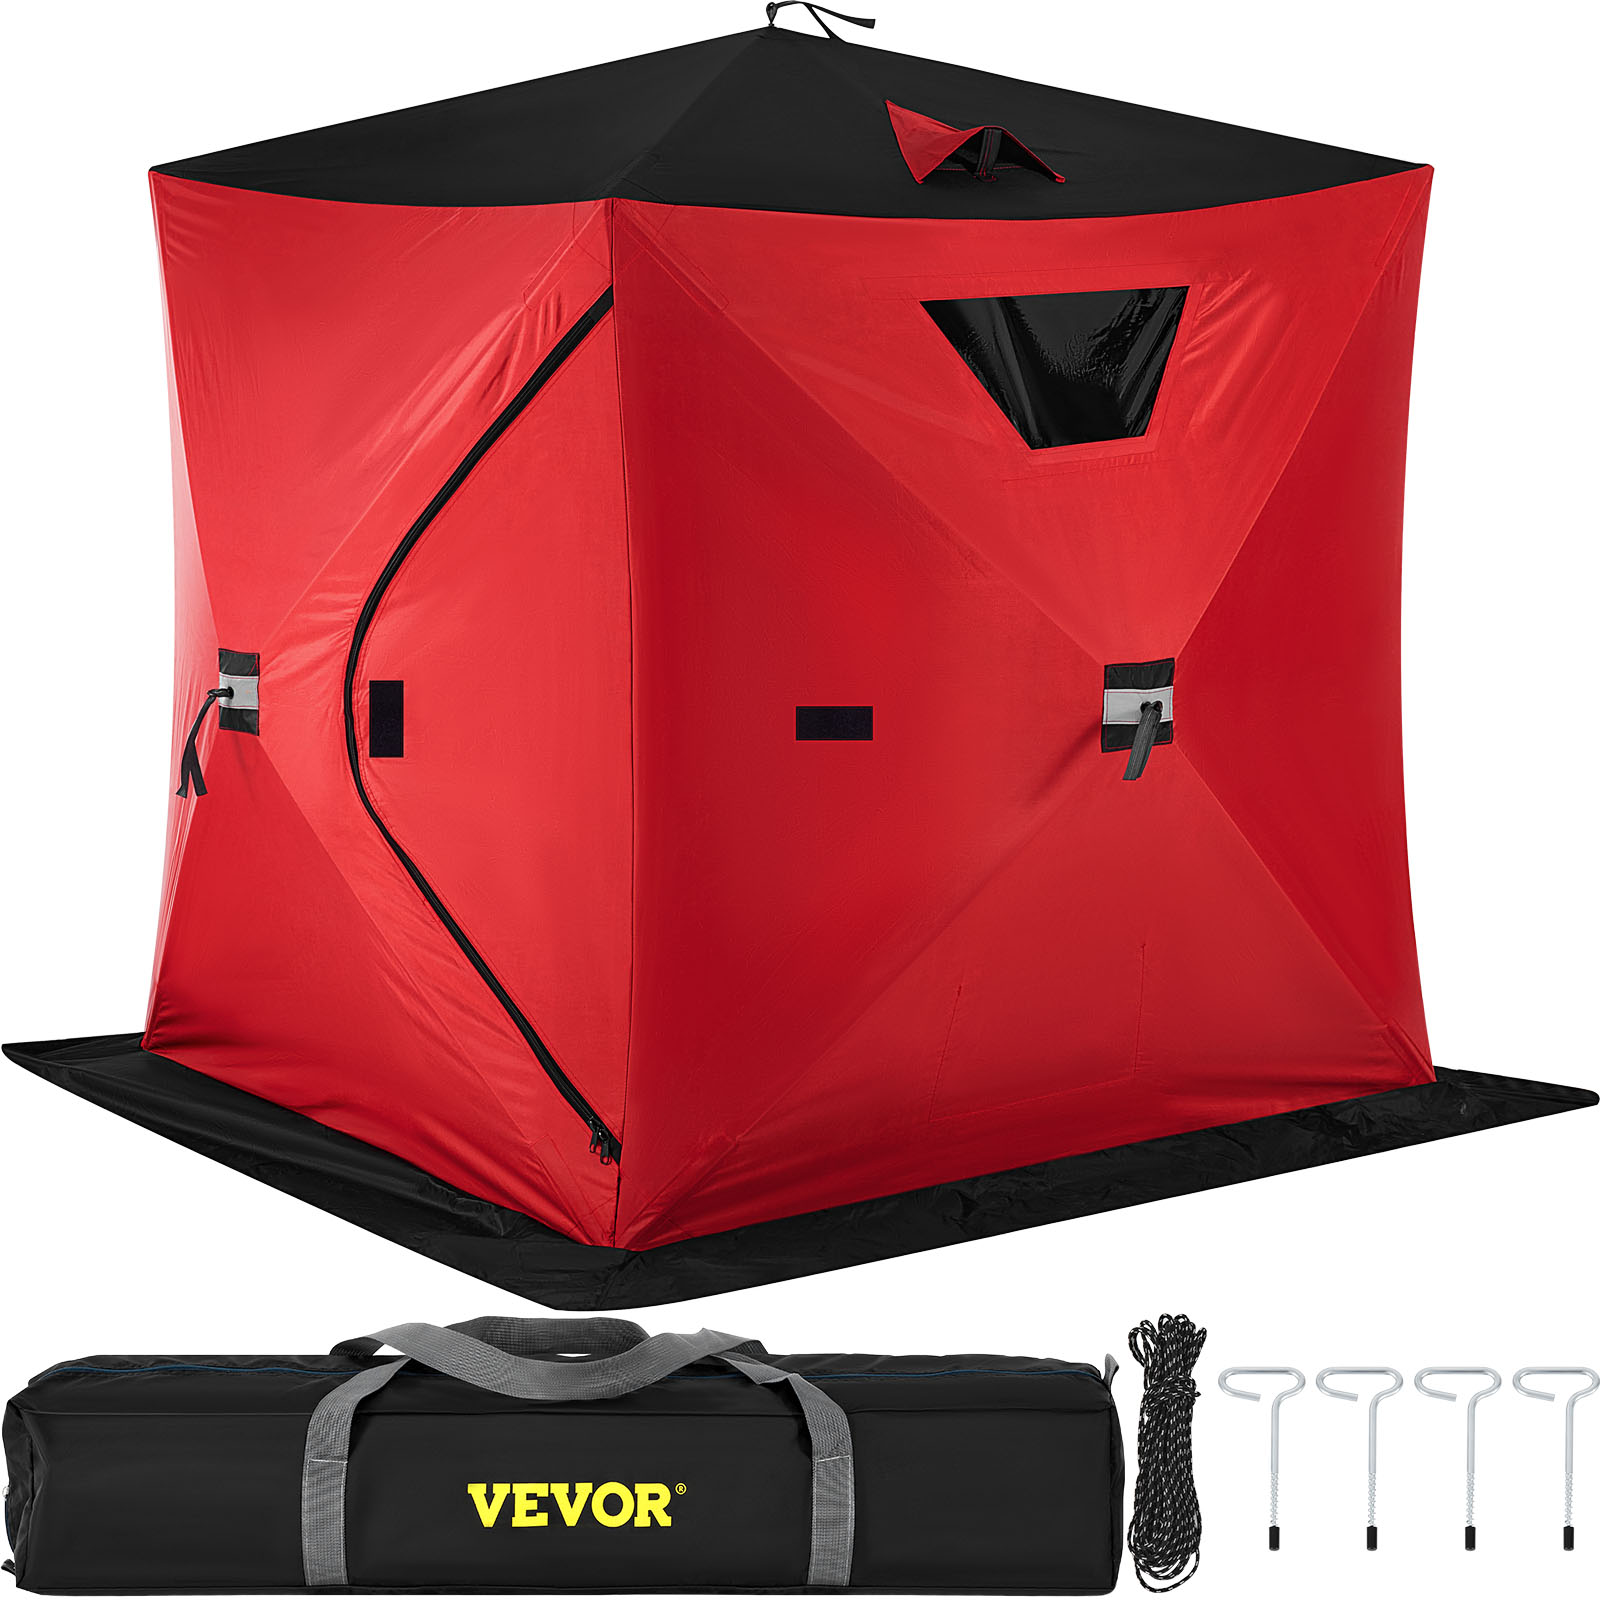 VEVOR 2-Person Ice Fishing Shelter Tent Portable Pop Up House Outdoor Fish Equipment